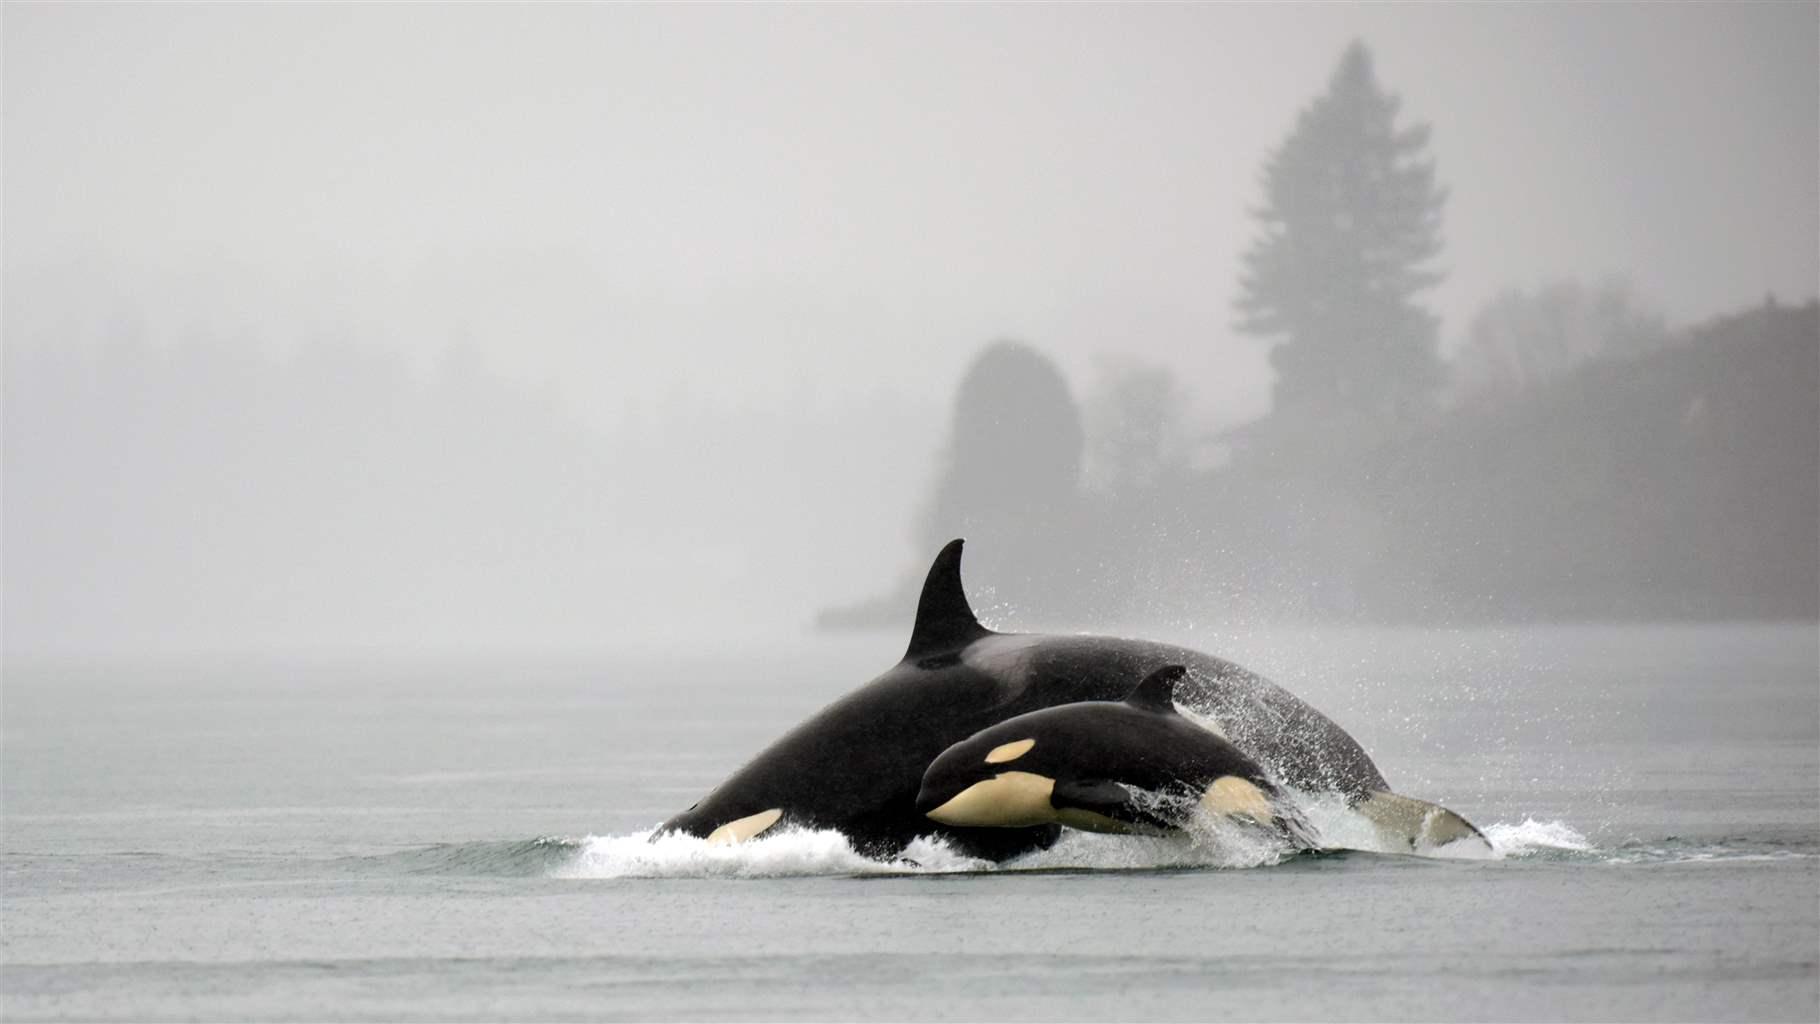 Orca whales depend on salmon that spawn in rivers in Washington state. 